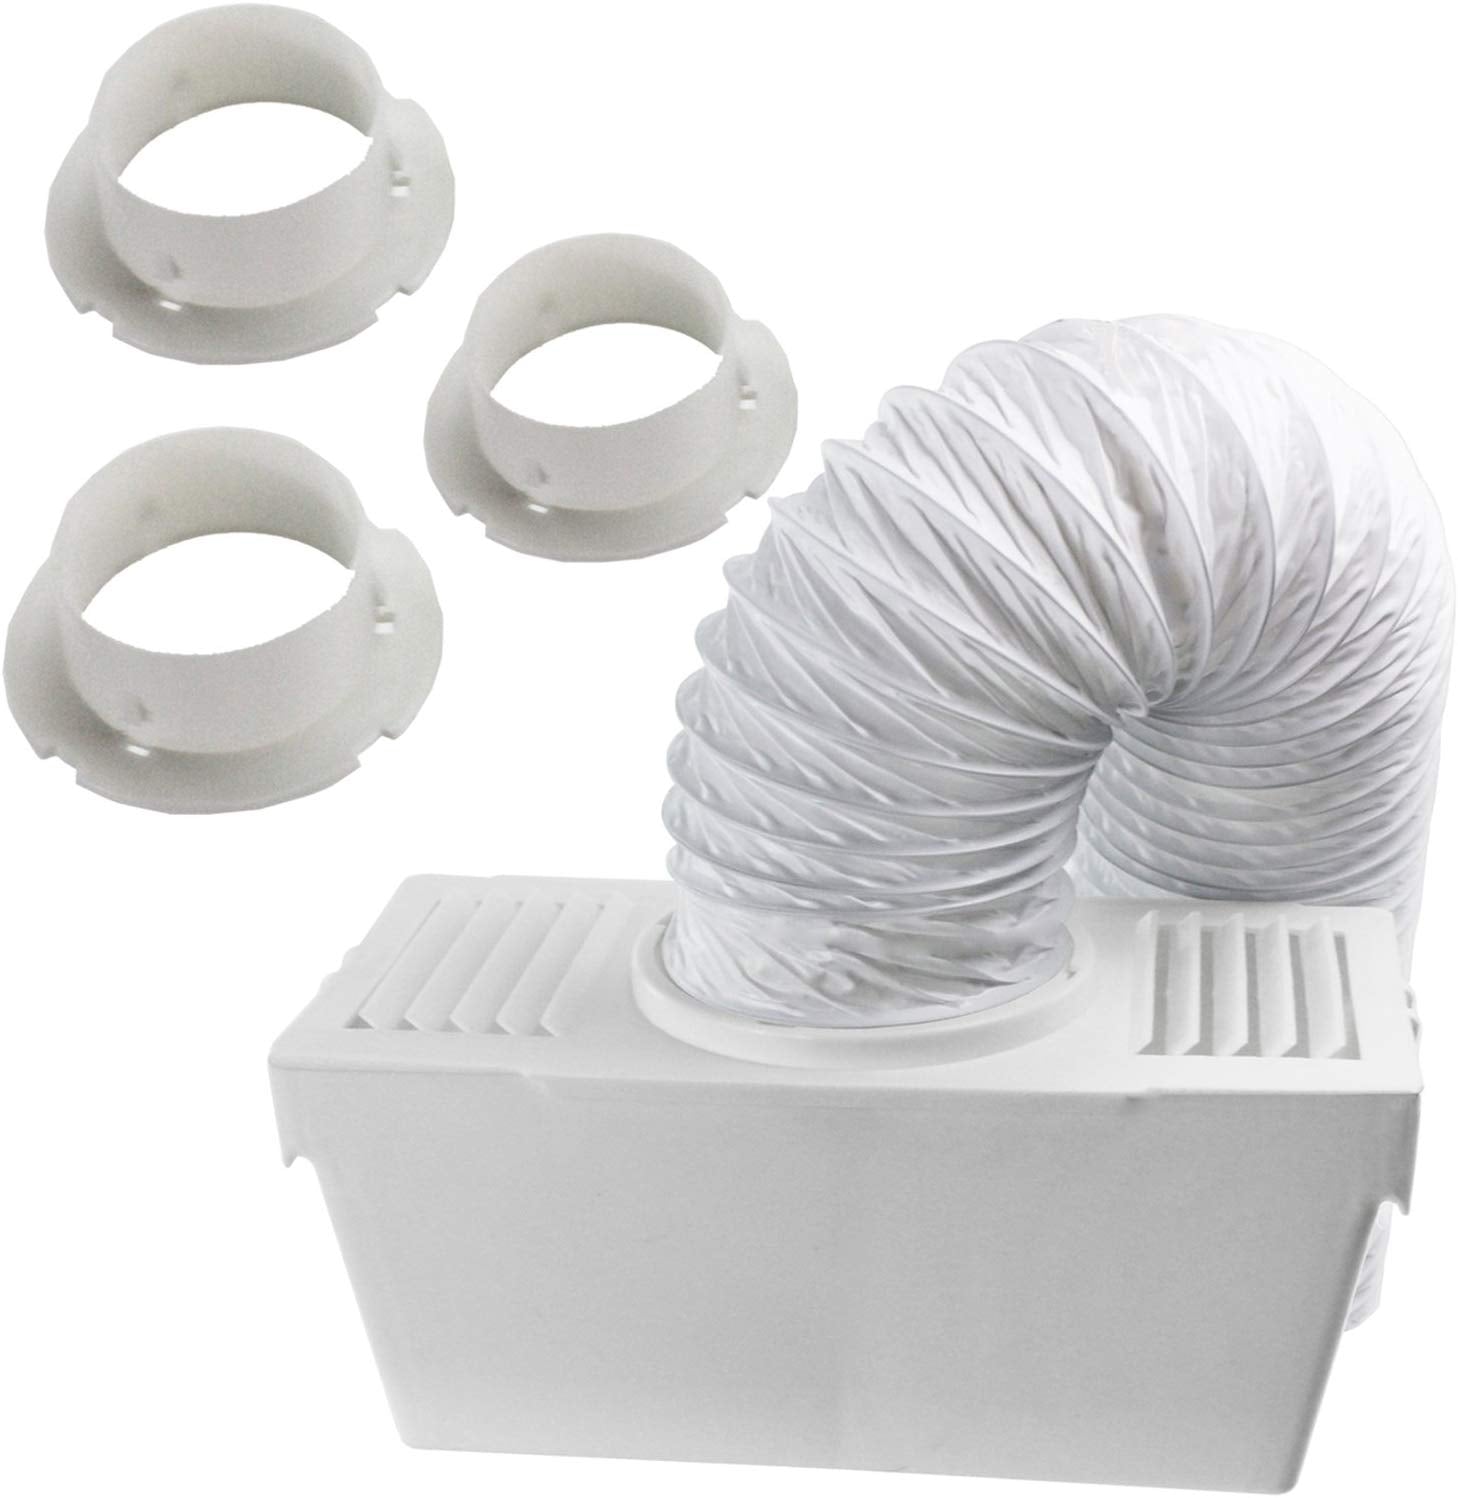 Vent Hose Condenser Kit with 3 x Adapters for Whirlpool Tumble Dryer (1.2m)